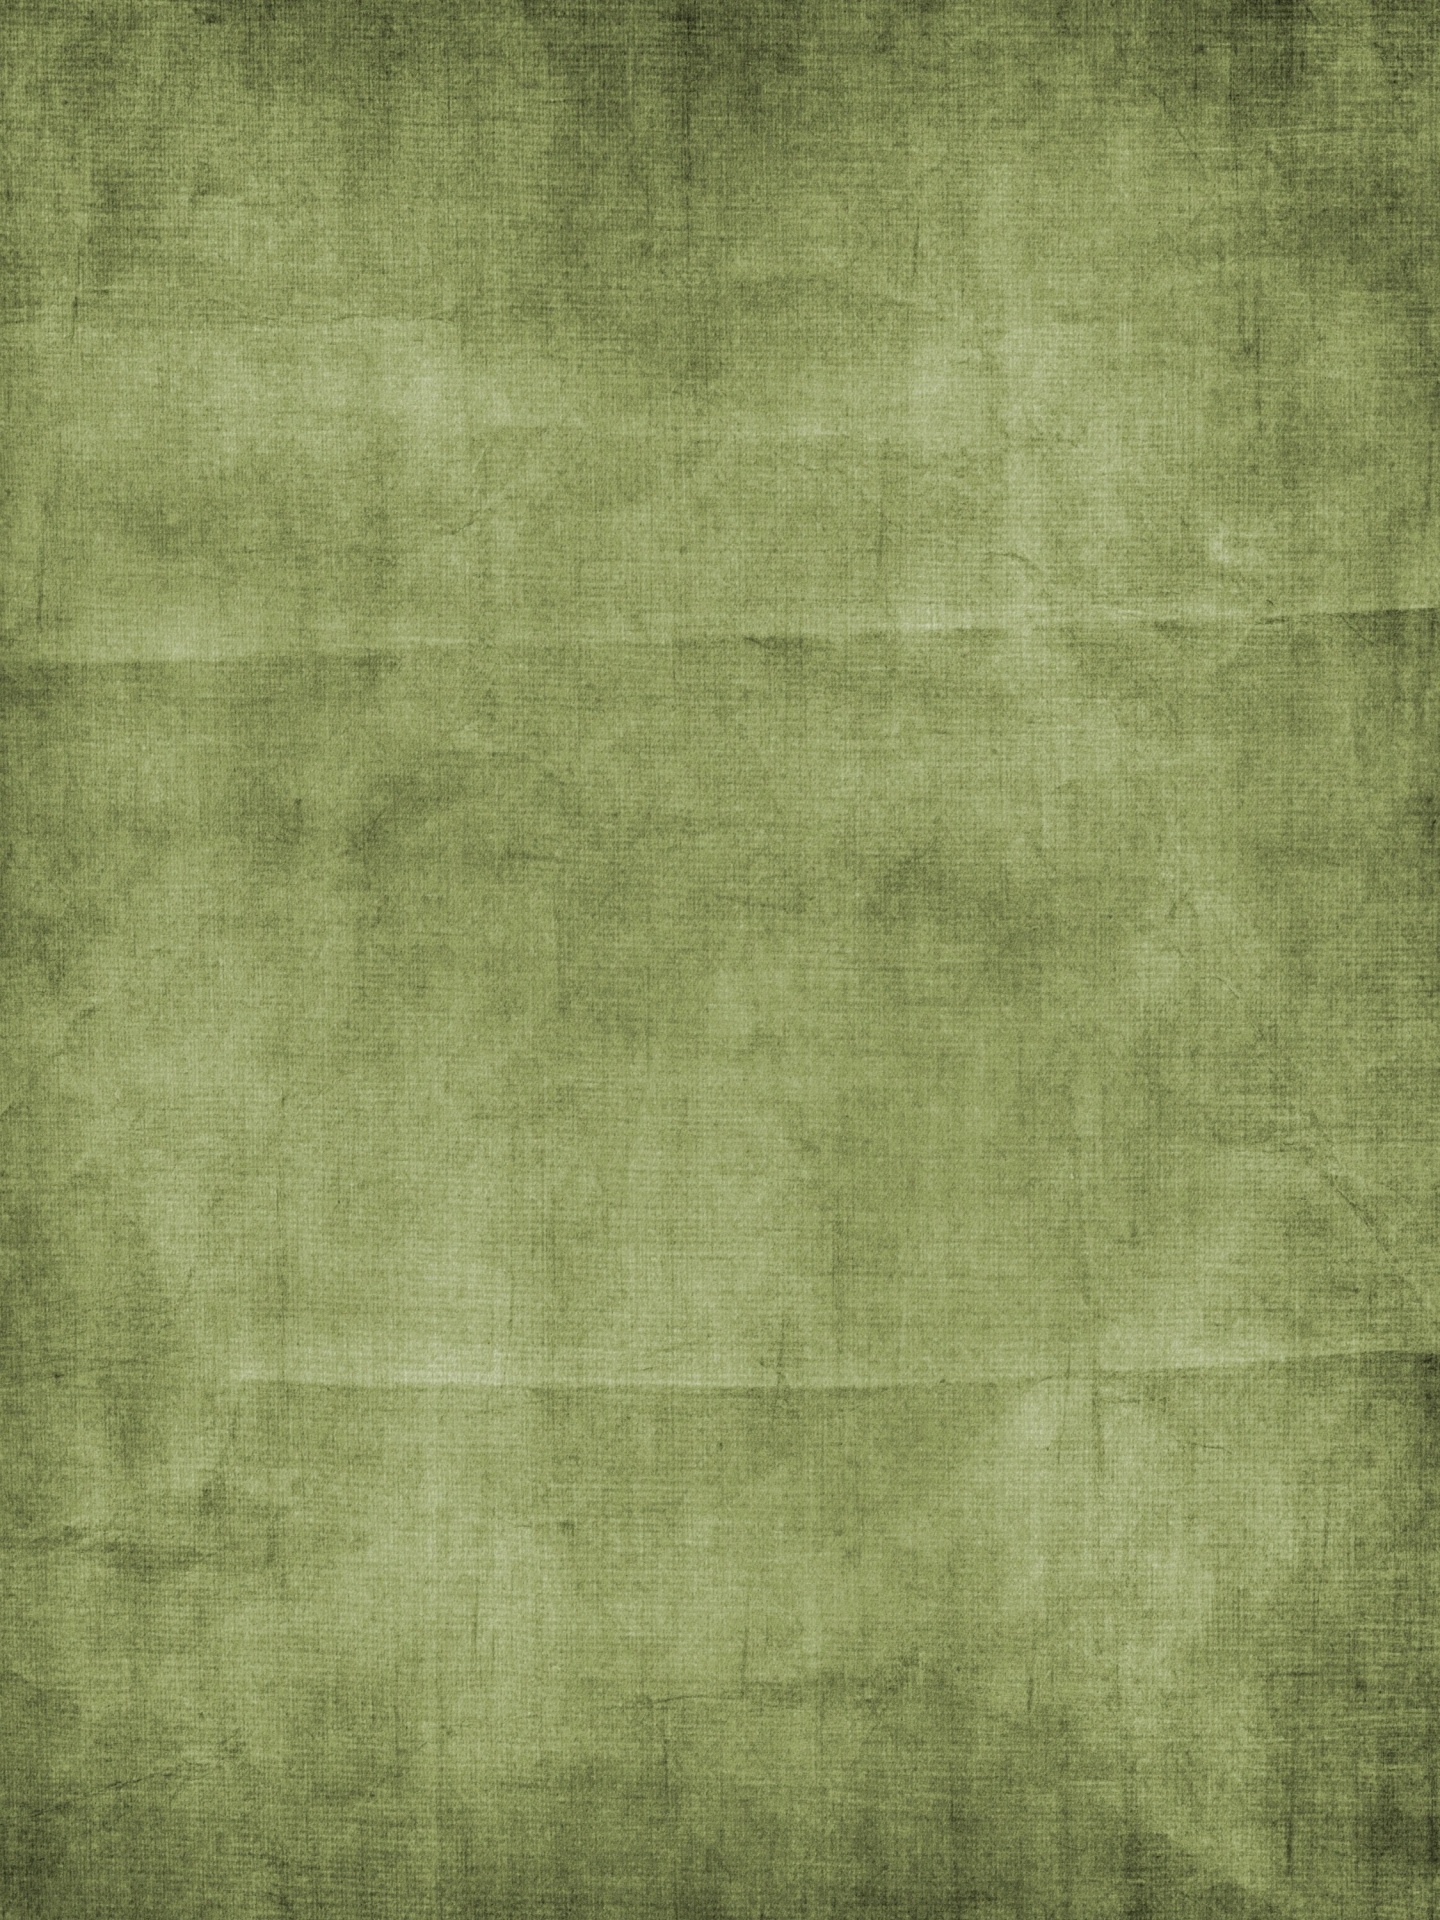 Background,green,texture,simple,vintage - free image from needpix.com